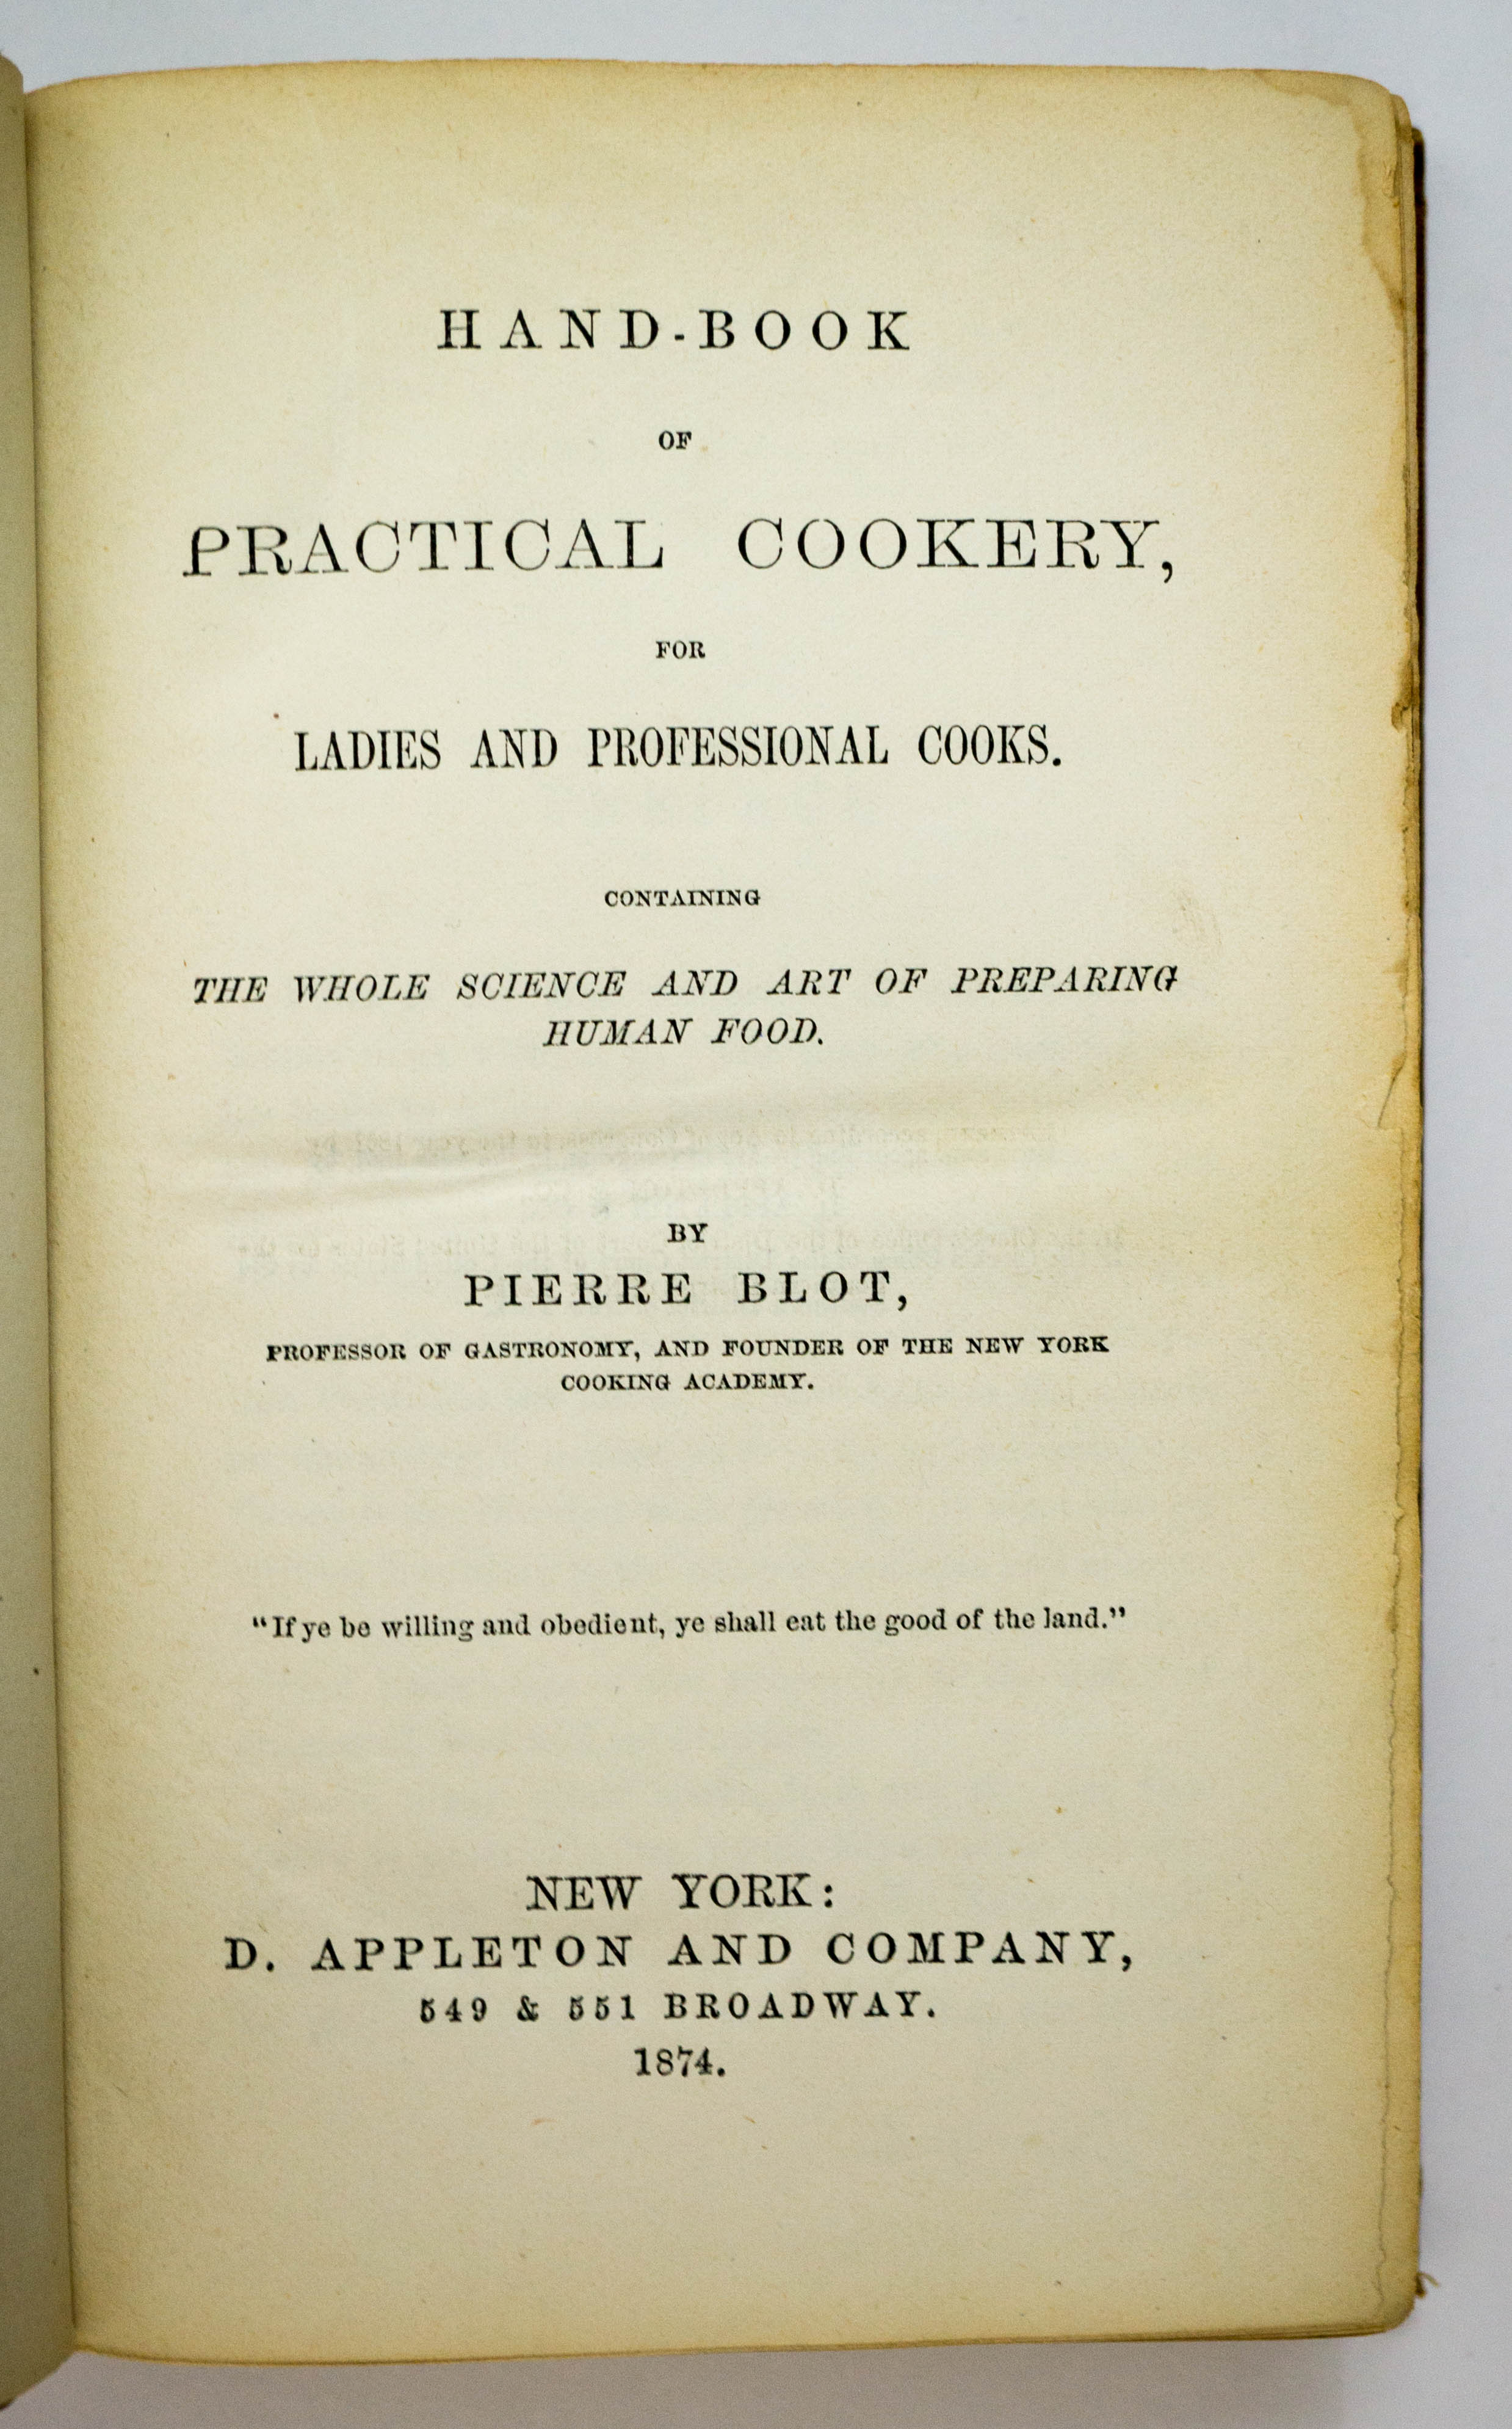 Hand-Book of Practical Cookery by Pierre Blot 1874